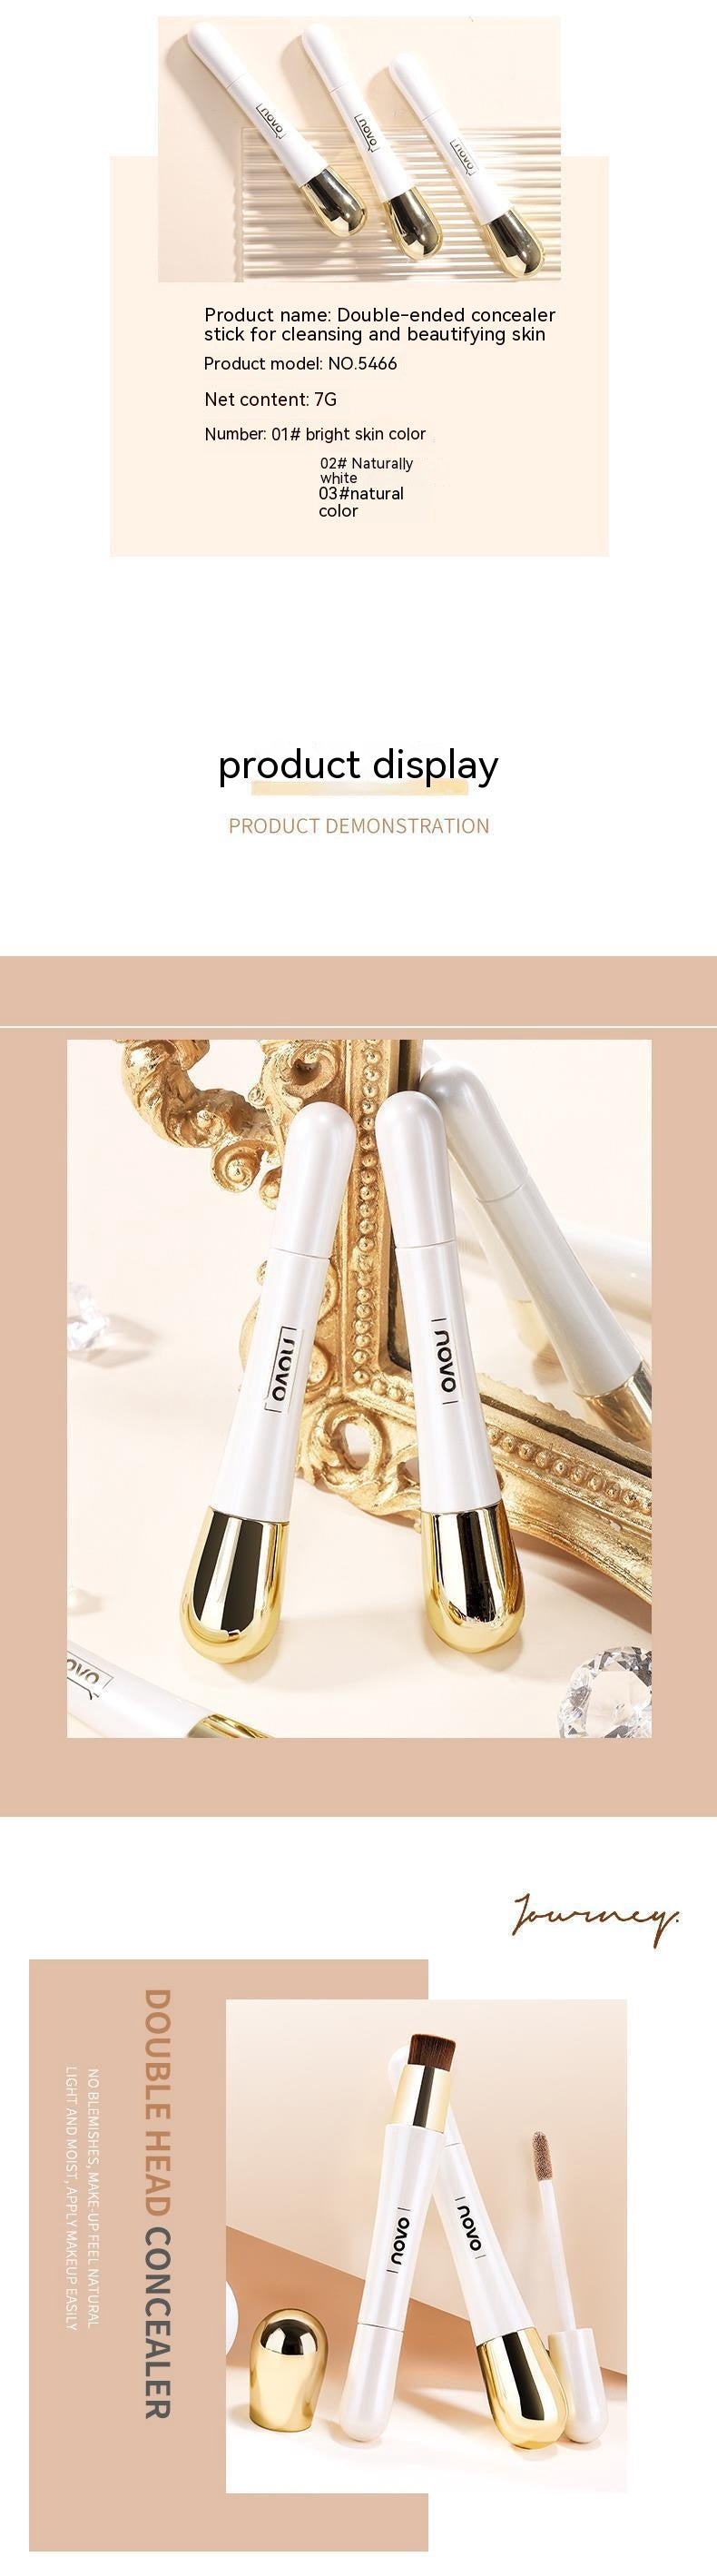 NOVO Facial Cleansing And Skin Beauty Double-headed Stick Concealer Concealer Pen